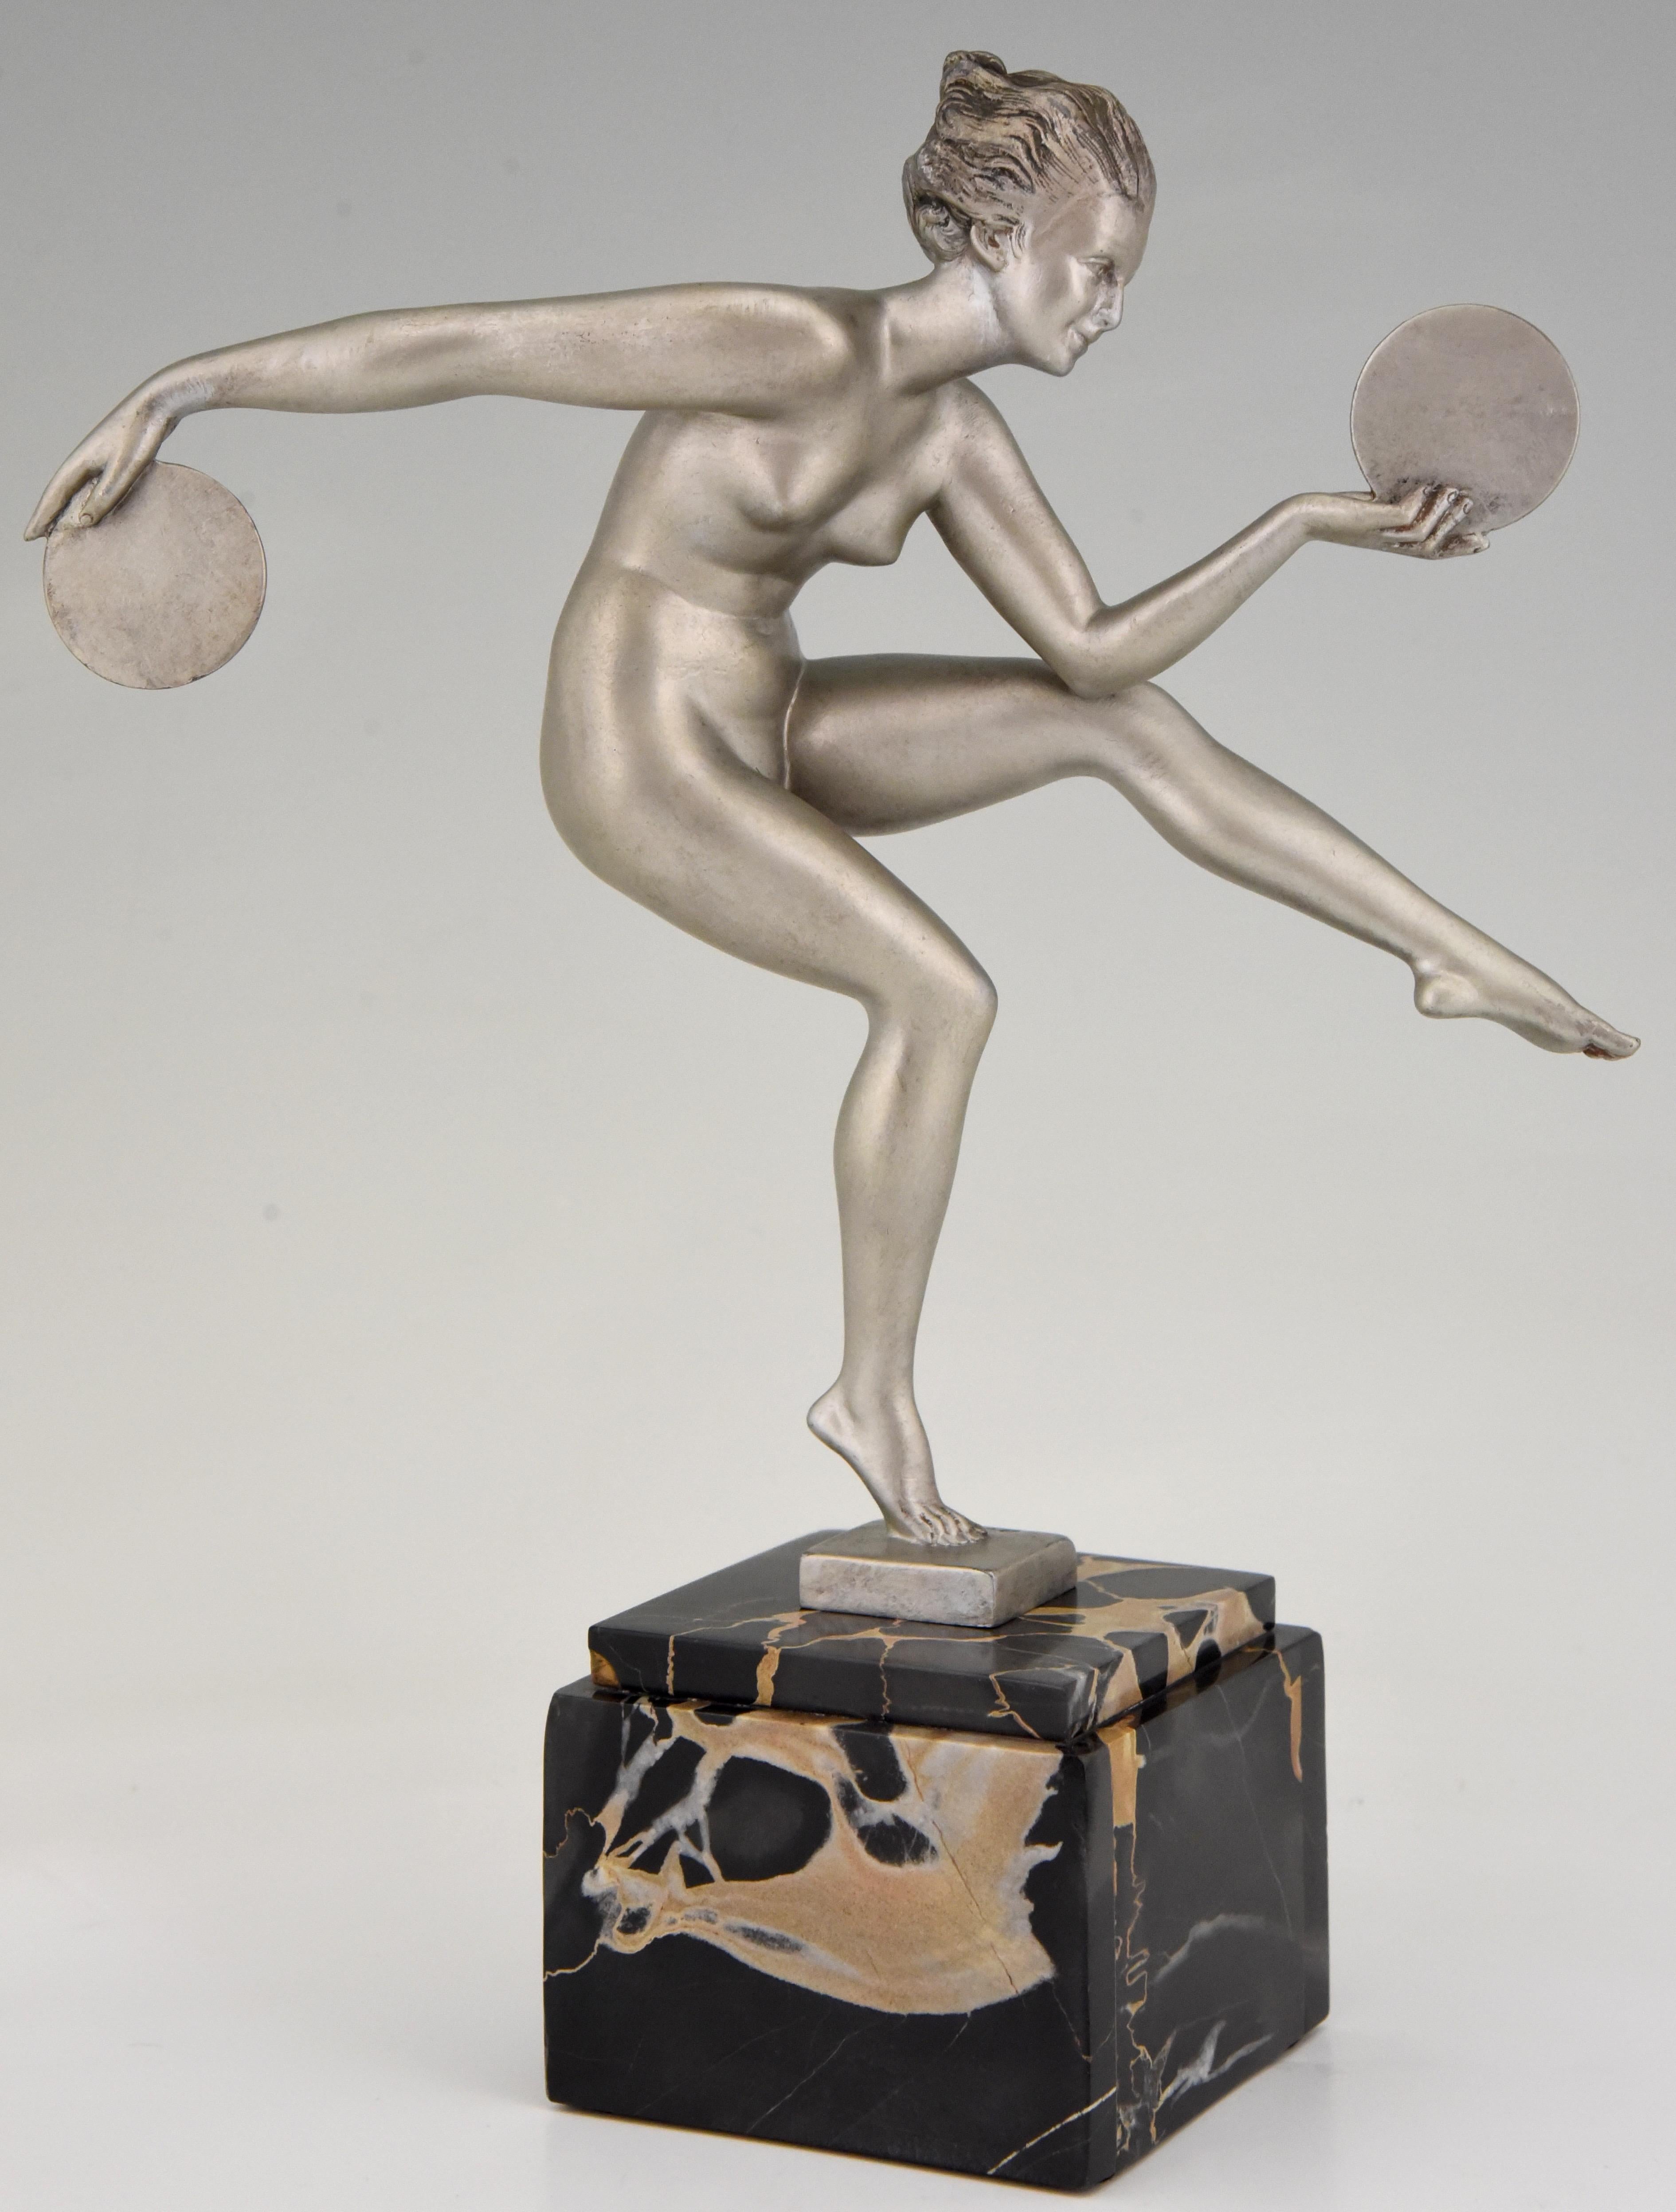 Elegant Art Deco sculpture of a dancing nude with discs by Derenne, pseudonym of Marcel Bouraine for his art metal sculptures cast by the Max Le Verrier foundry, France, 1930.
The art metal sculpture has a silver patina and stands on a Portor